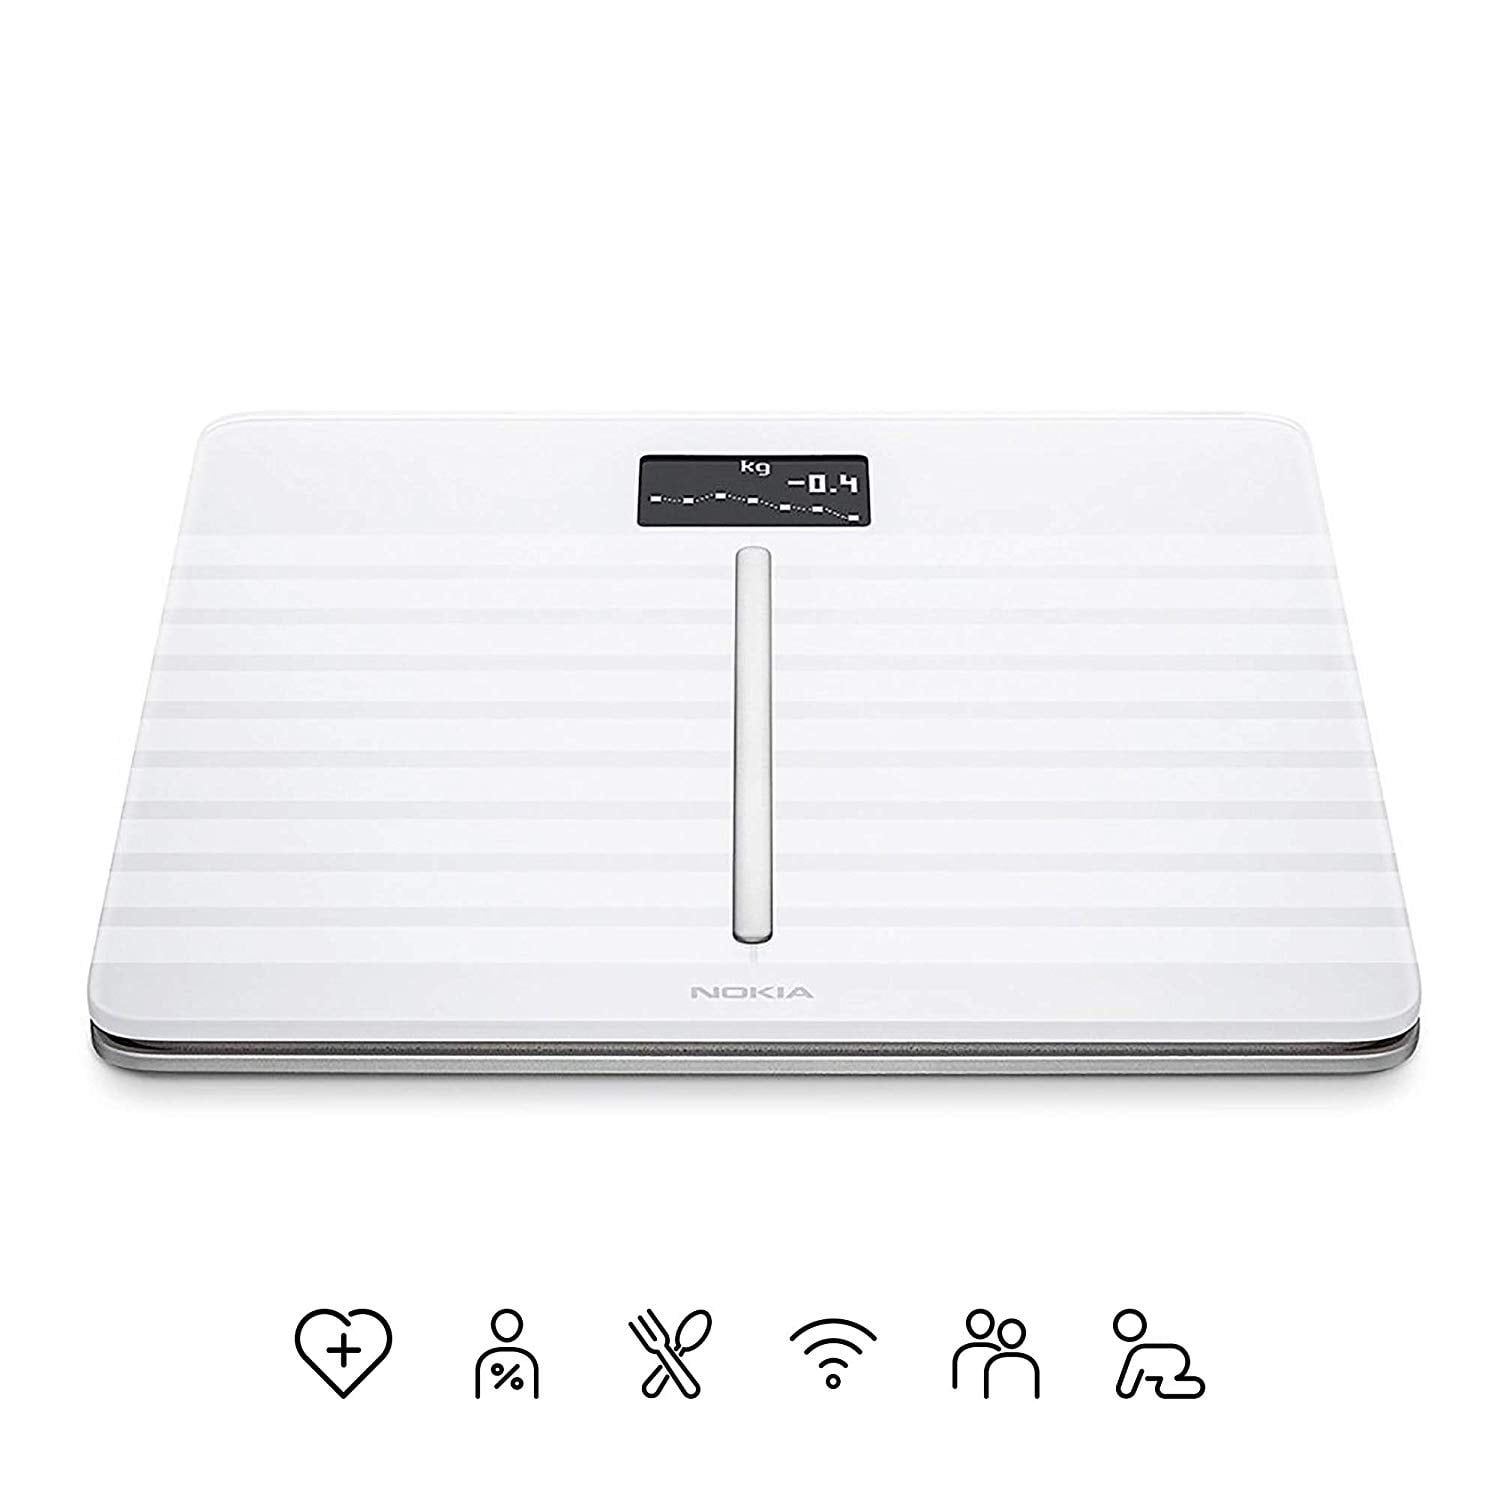 Withings Body Cardio: A stylish scale for fussy health nuts